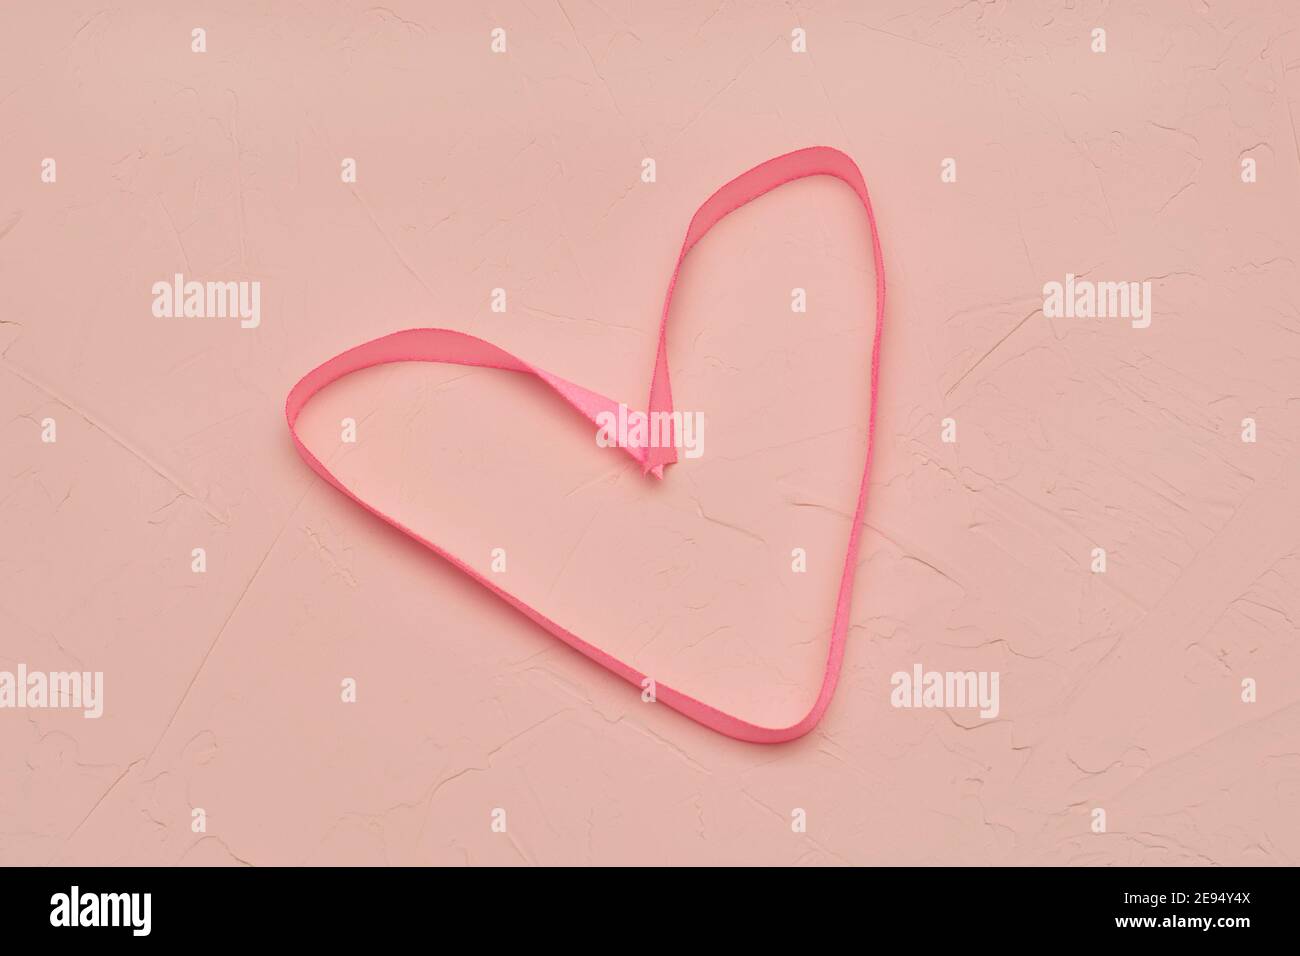 Silk fabric in shape of heart on pink background texture of concrete and plaster. Concept for Valentine's Day, love, wedding. Stock Photo